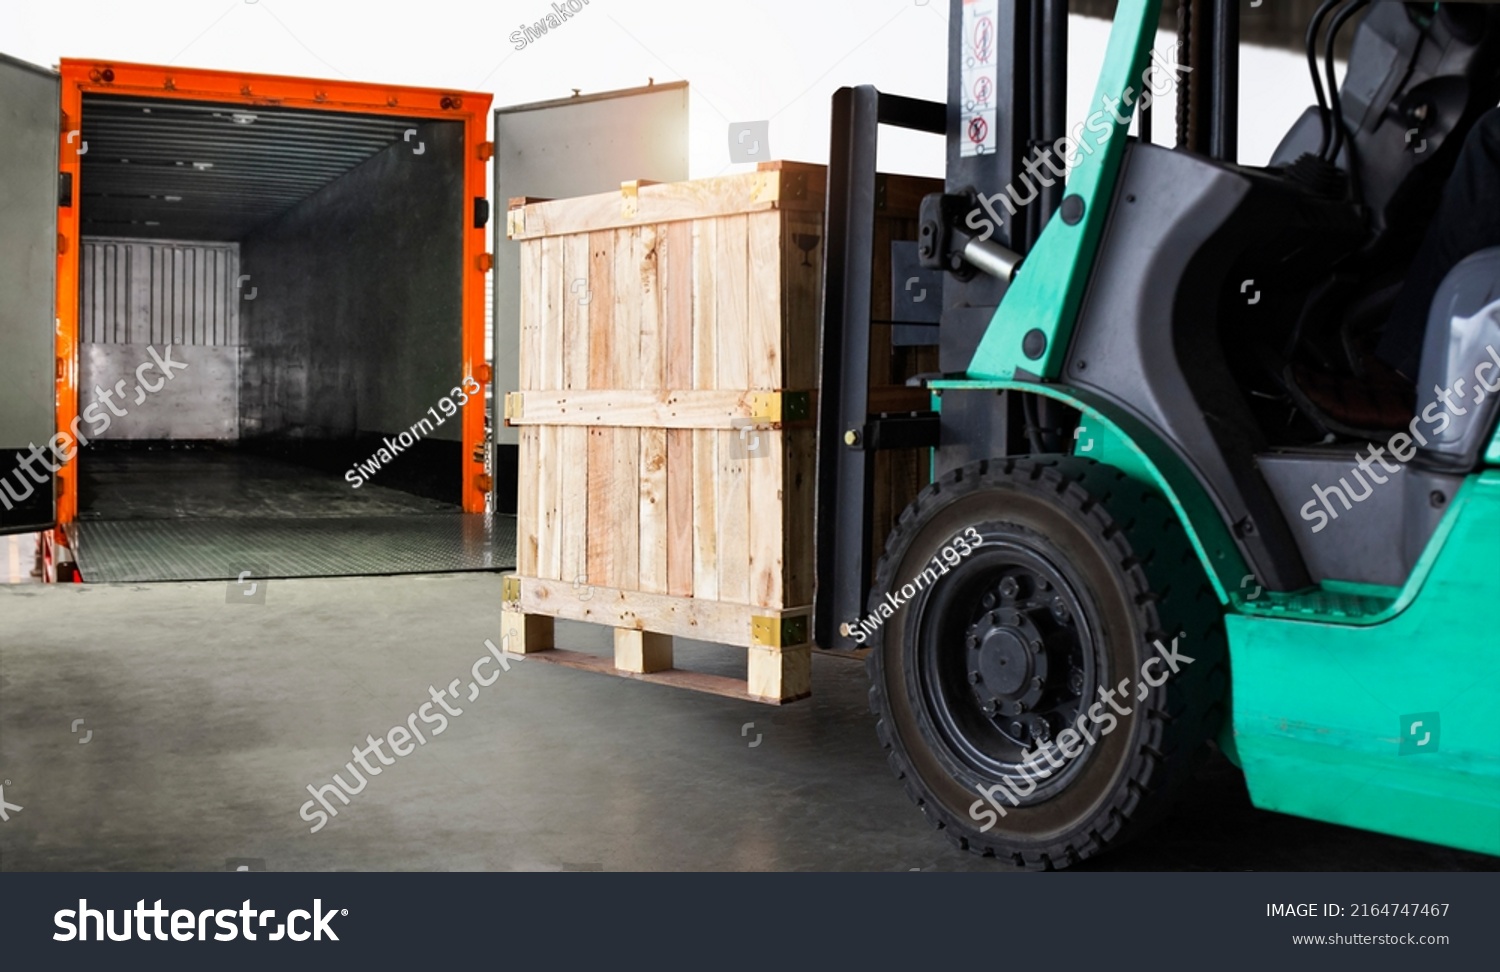 Forklift Tractor Loading Wooden Crate Boxes into Cargo Container. Shipping Trucks. Delivery Cargo Service. Supply Chain Goods Shipment. Warehouse Logistics Transport. #2164747467